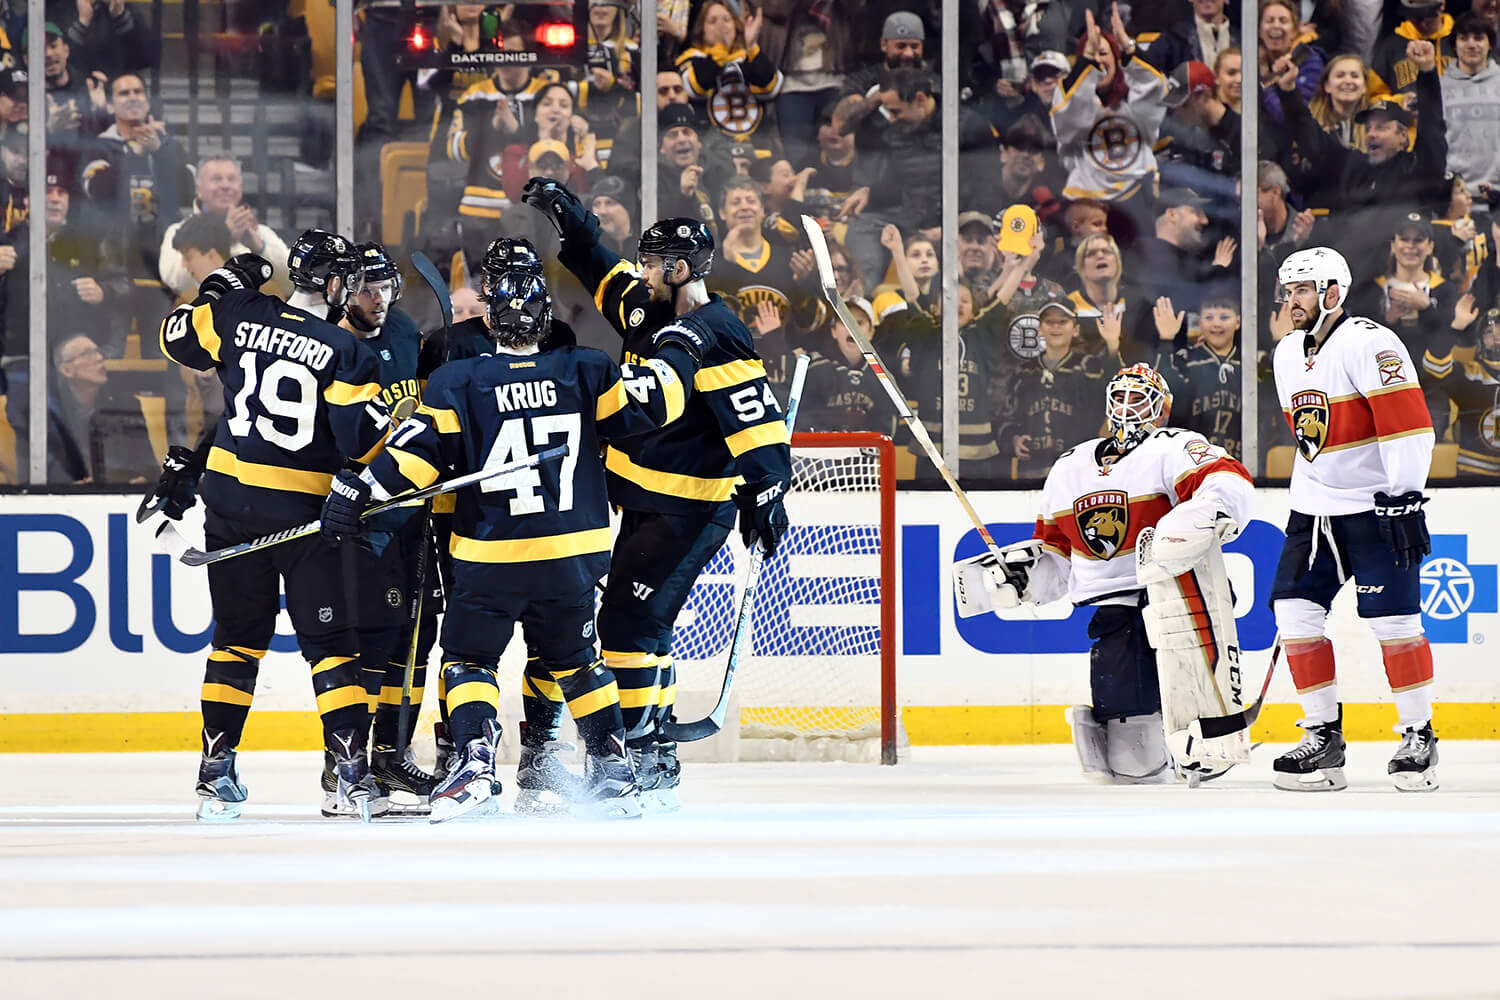 As Bruins Inch Closer To Playoffs, What Can We Expect?